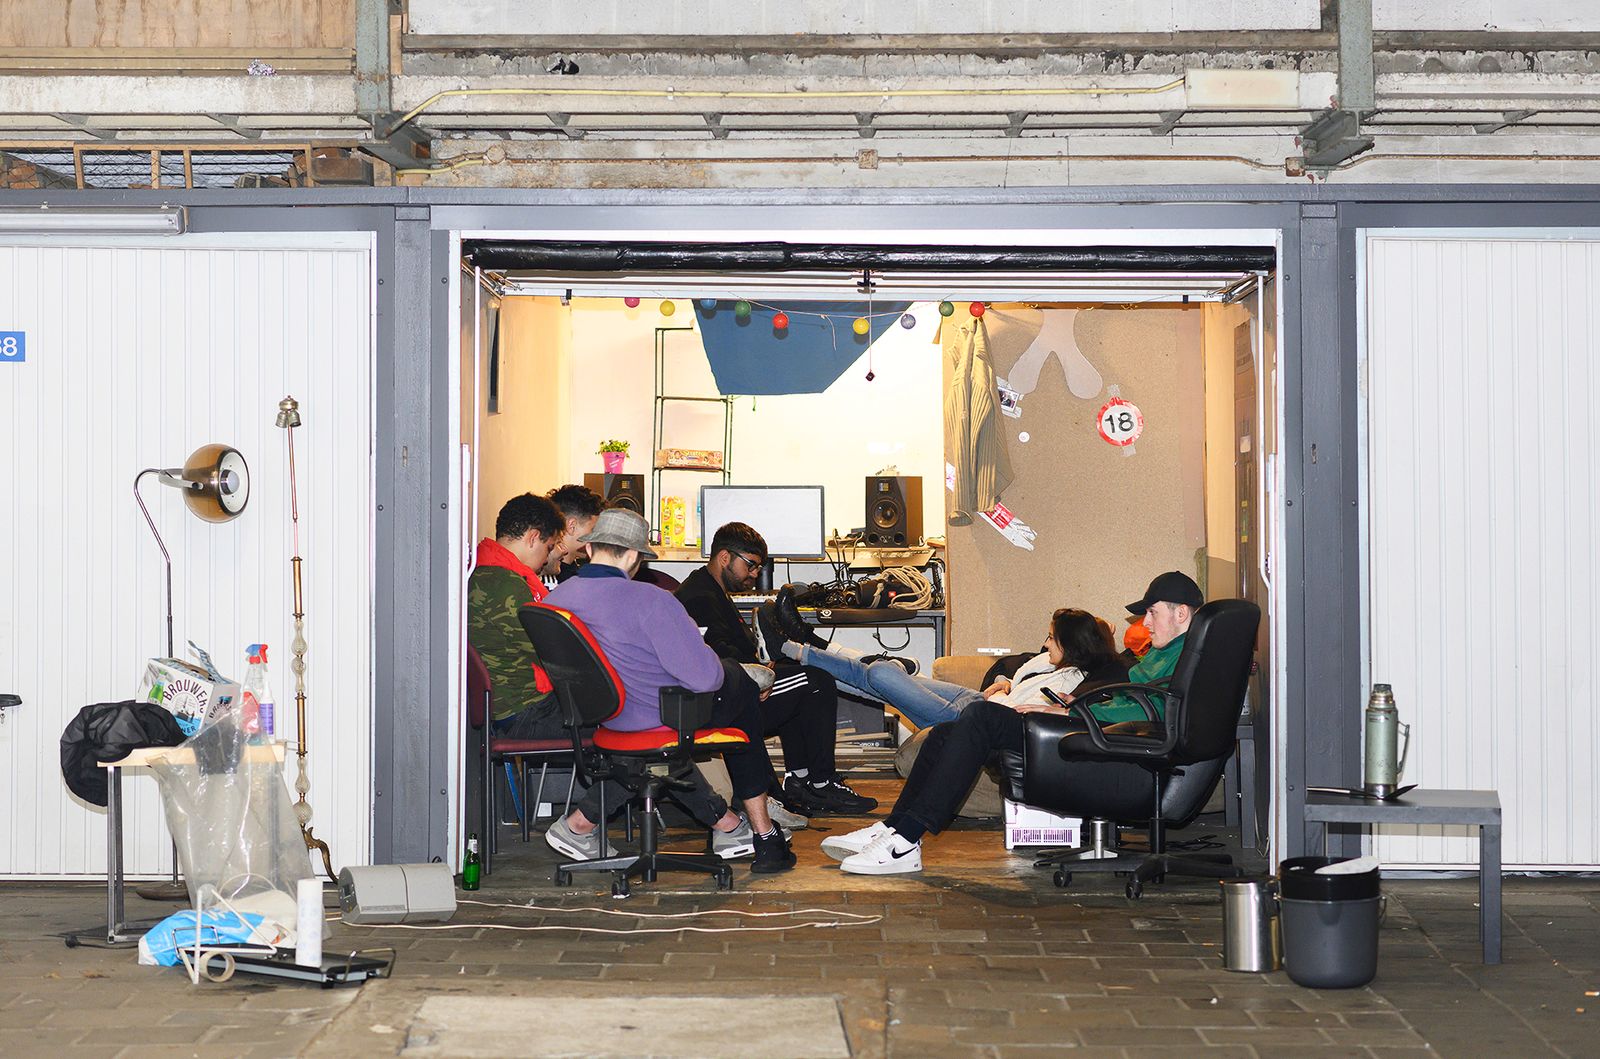 © Els Zweerink - The garagebox they use to hang out, listen to music, and make their own songs, based on their lifes.